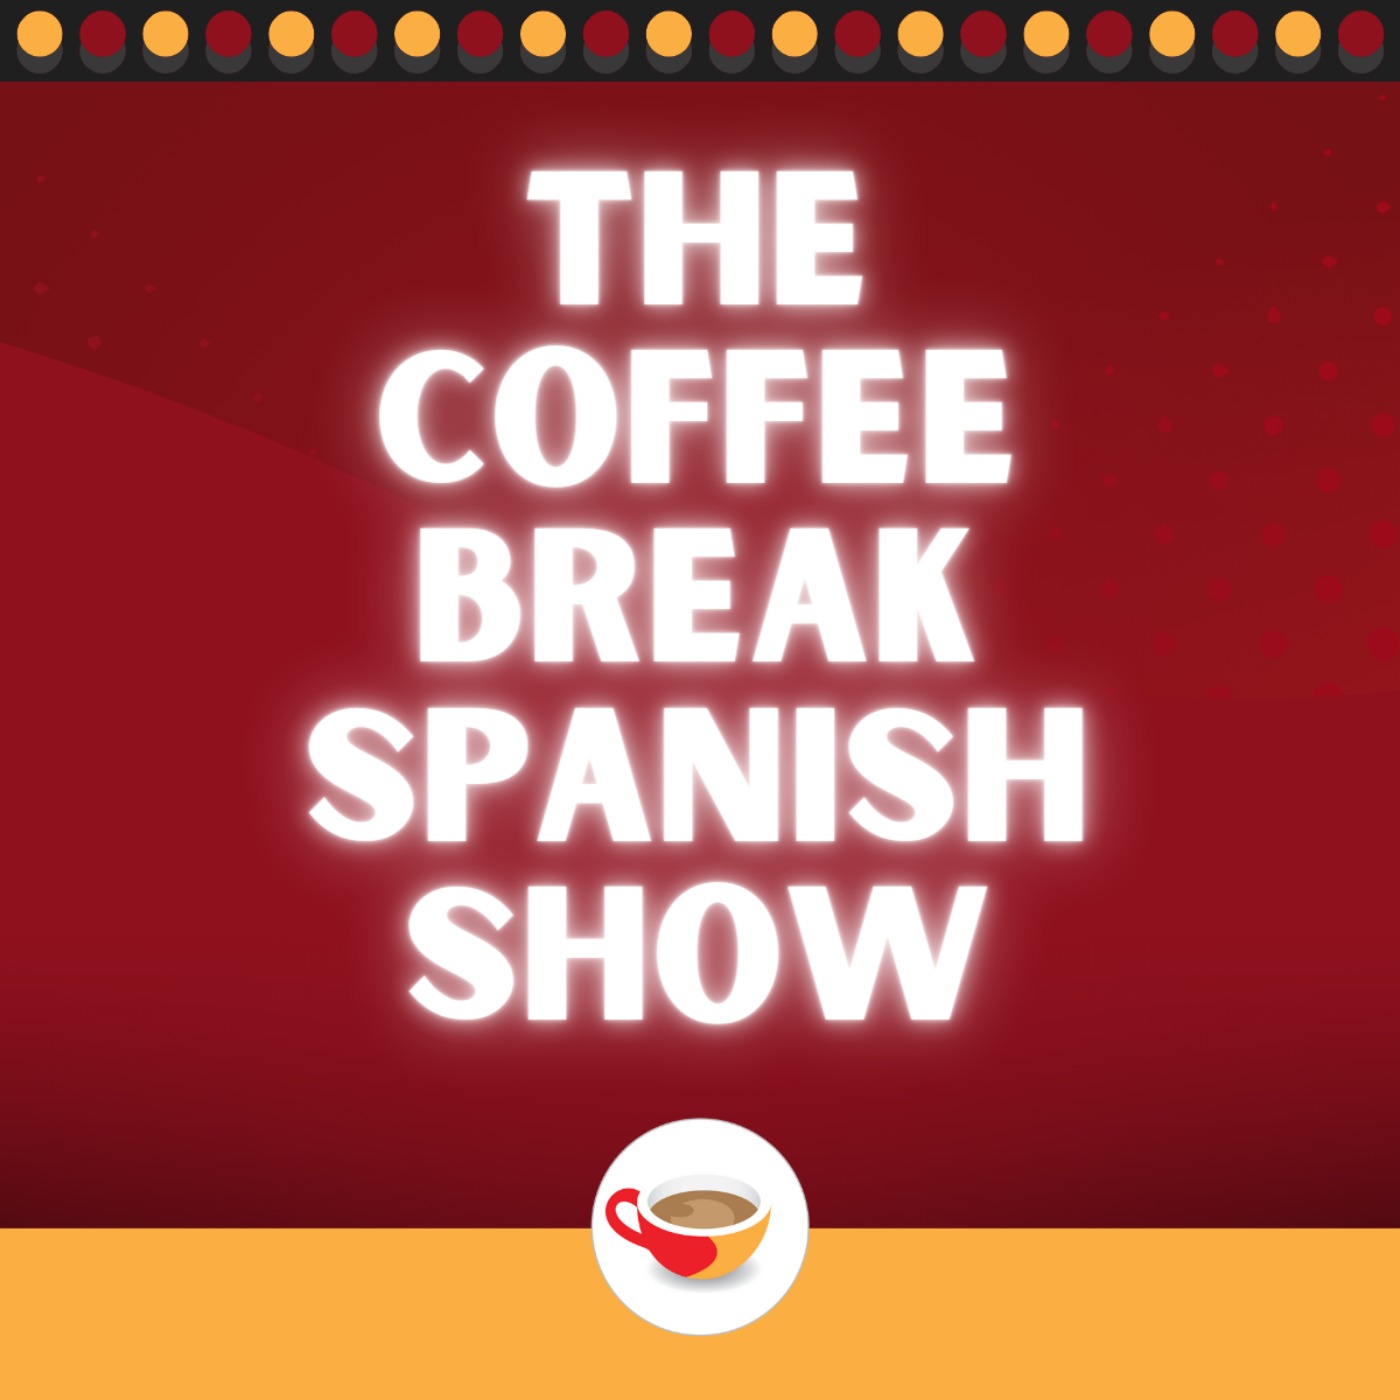 How to pronounce the ‘r’ in Spanish | The Coffee Break Spanish Show 1.01